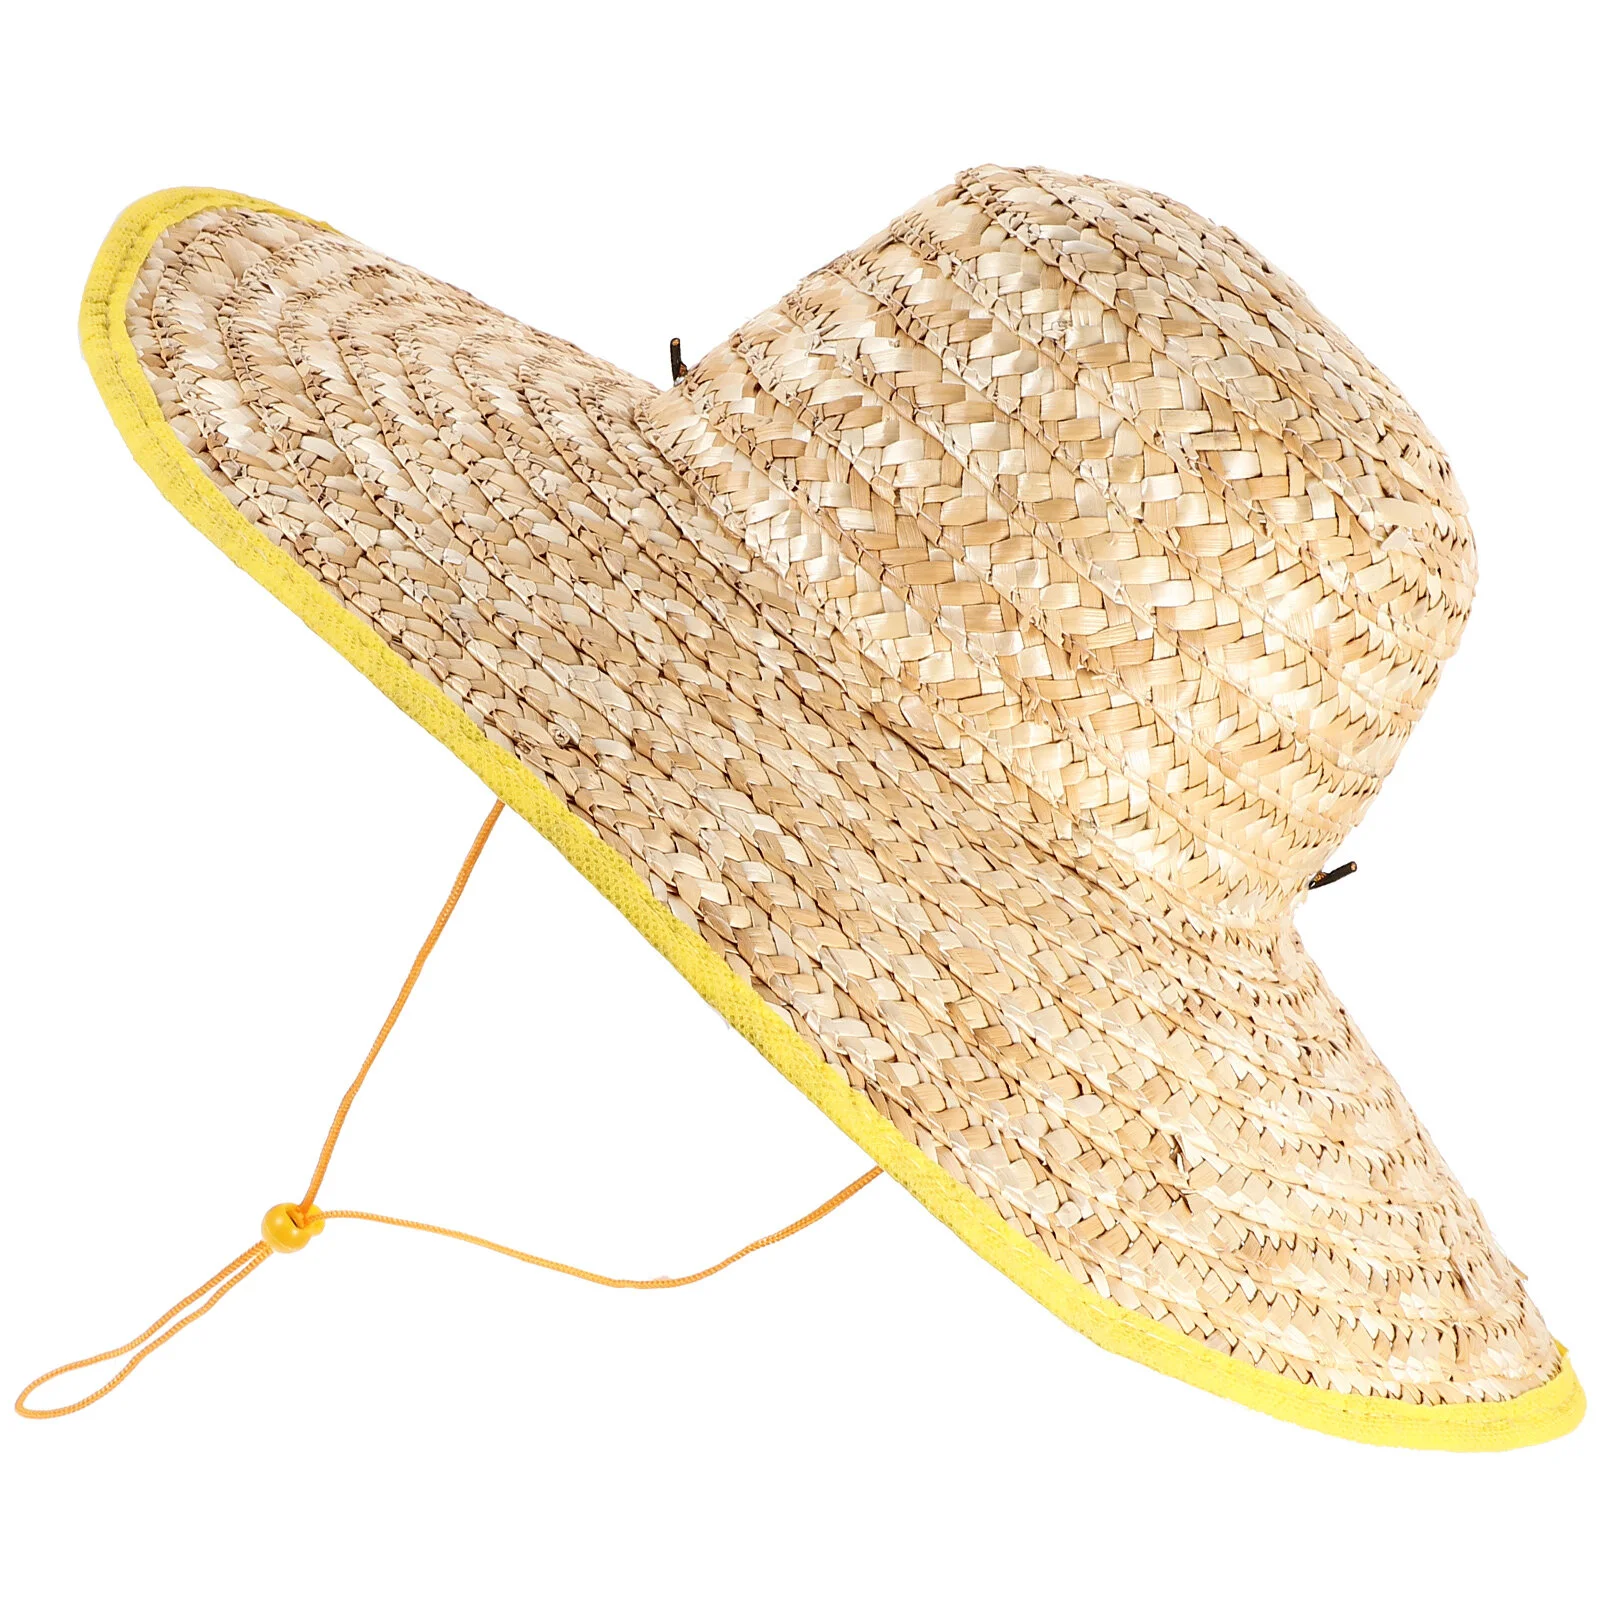 

Woven Hat Women's Straw Household Party Decorations Beach Themed Favors Costume Western Hats Fashionable Cowboy